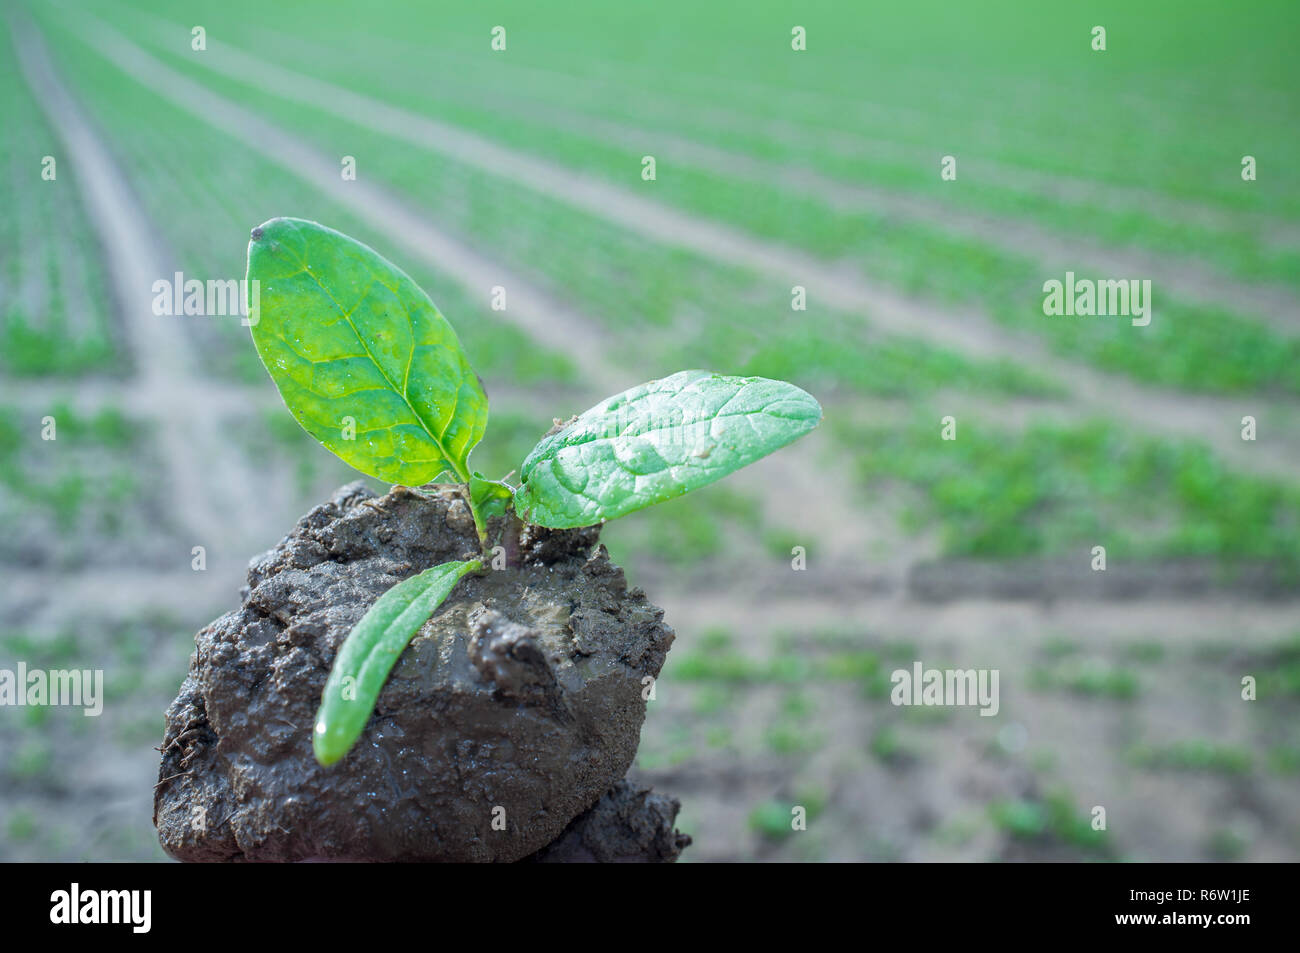 Sapling with espinach plant over cultivated field Stock Photo